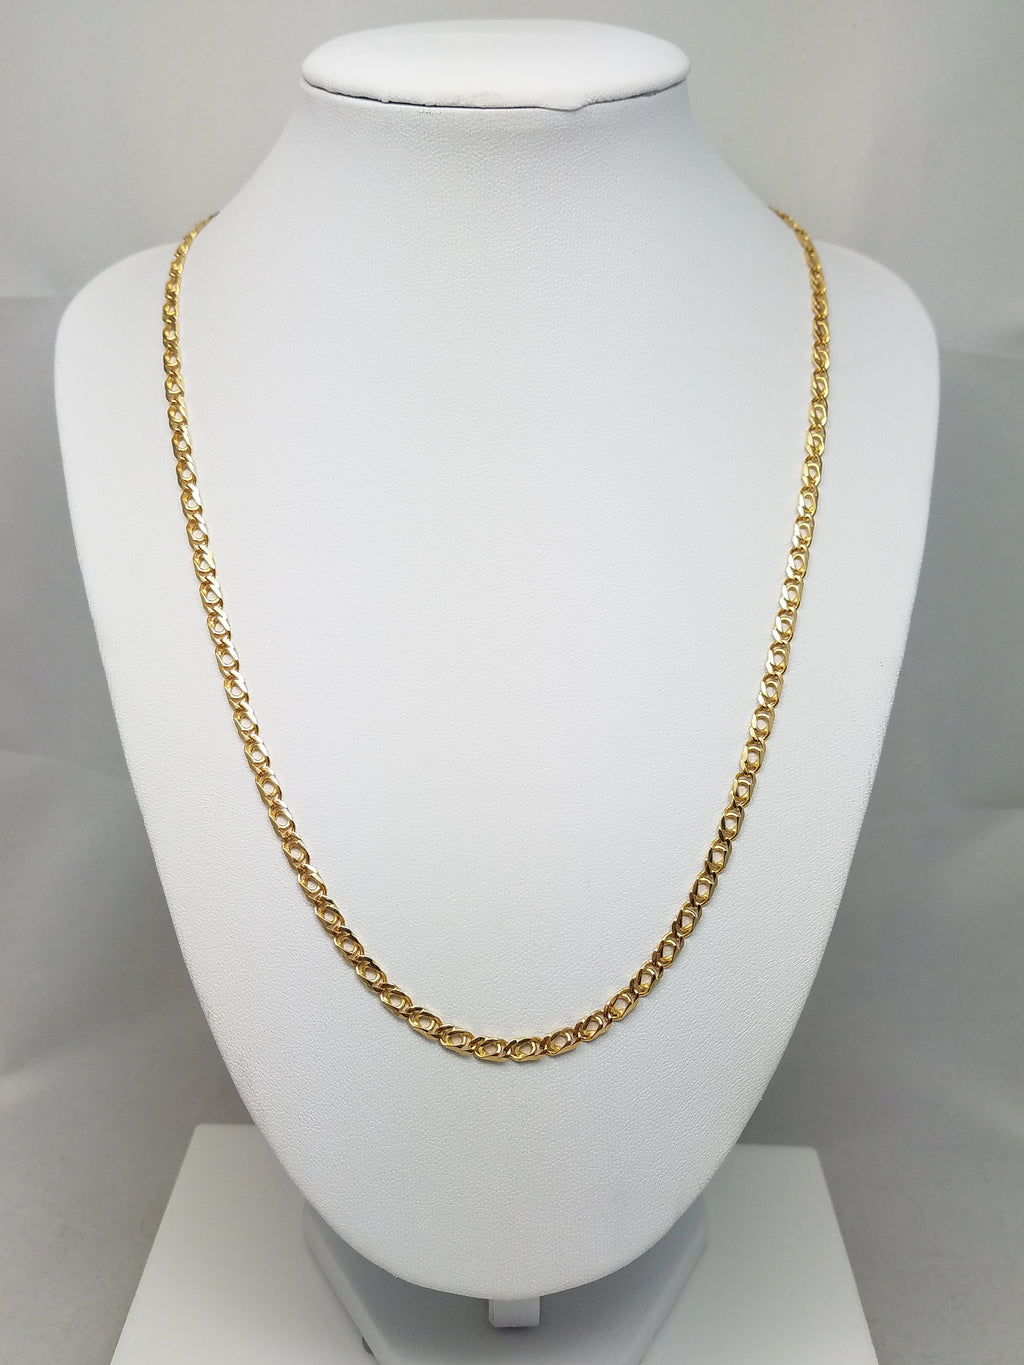 20" 14k Solid Yellow Gold Tiger Eye Link Chain Necklace Italy